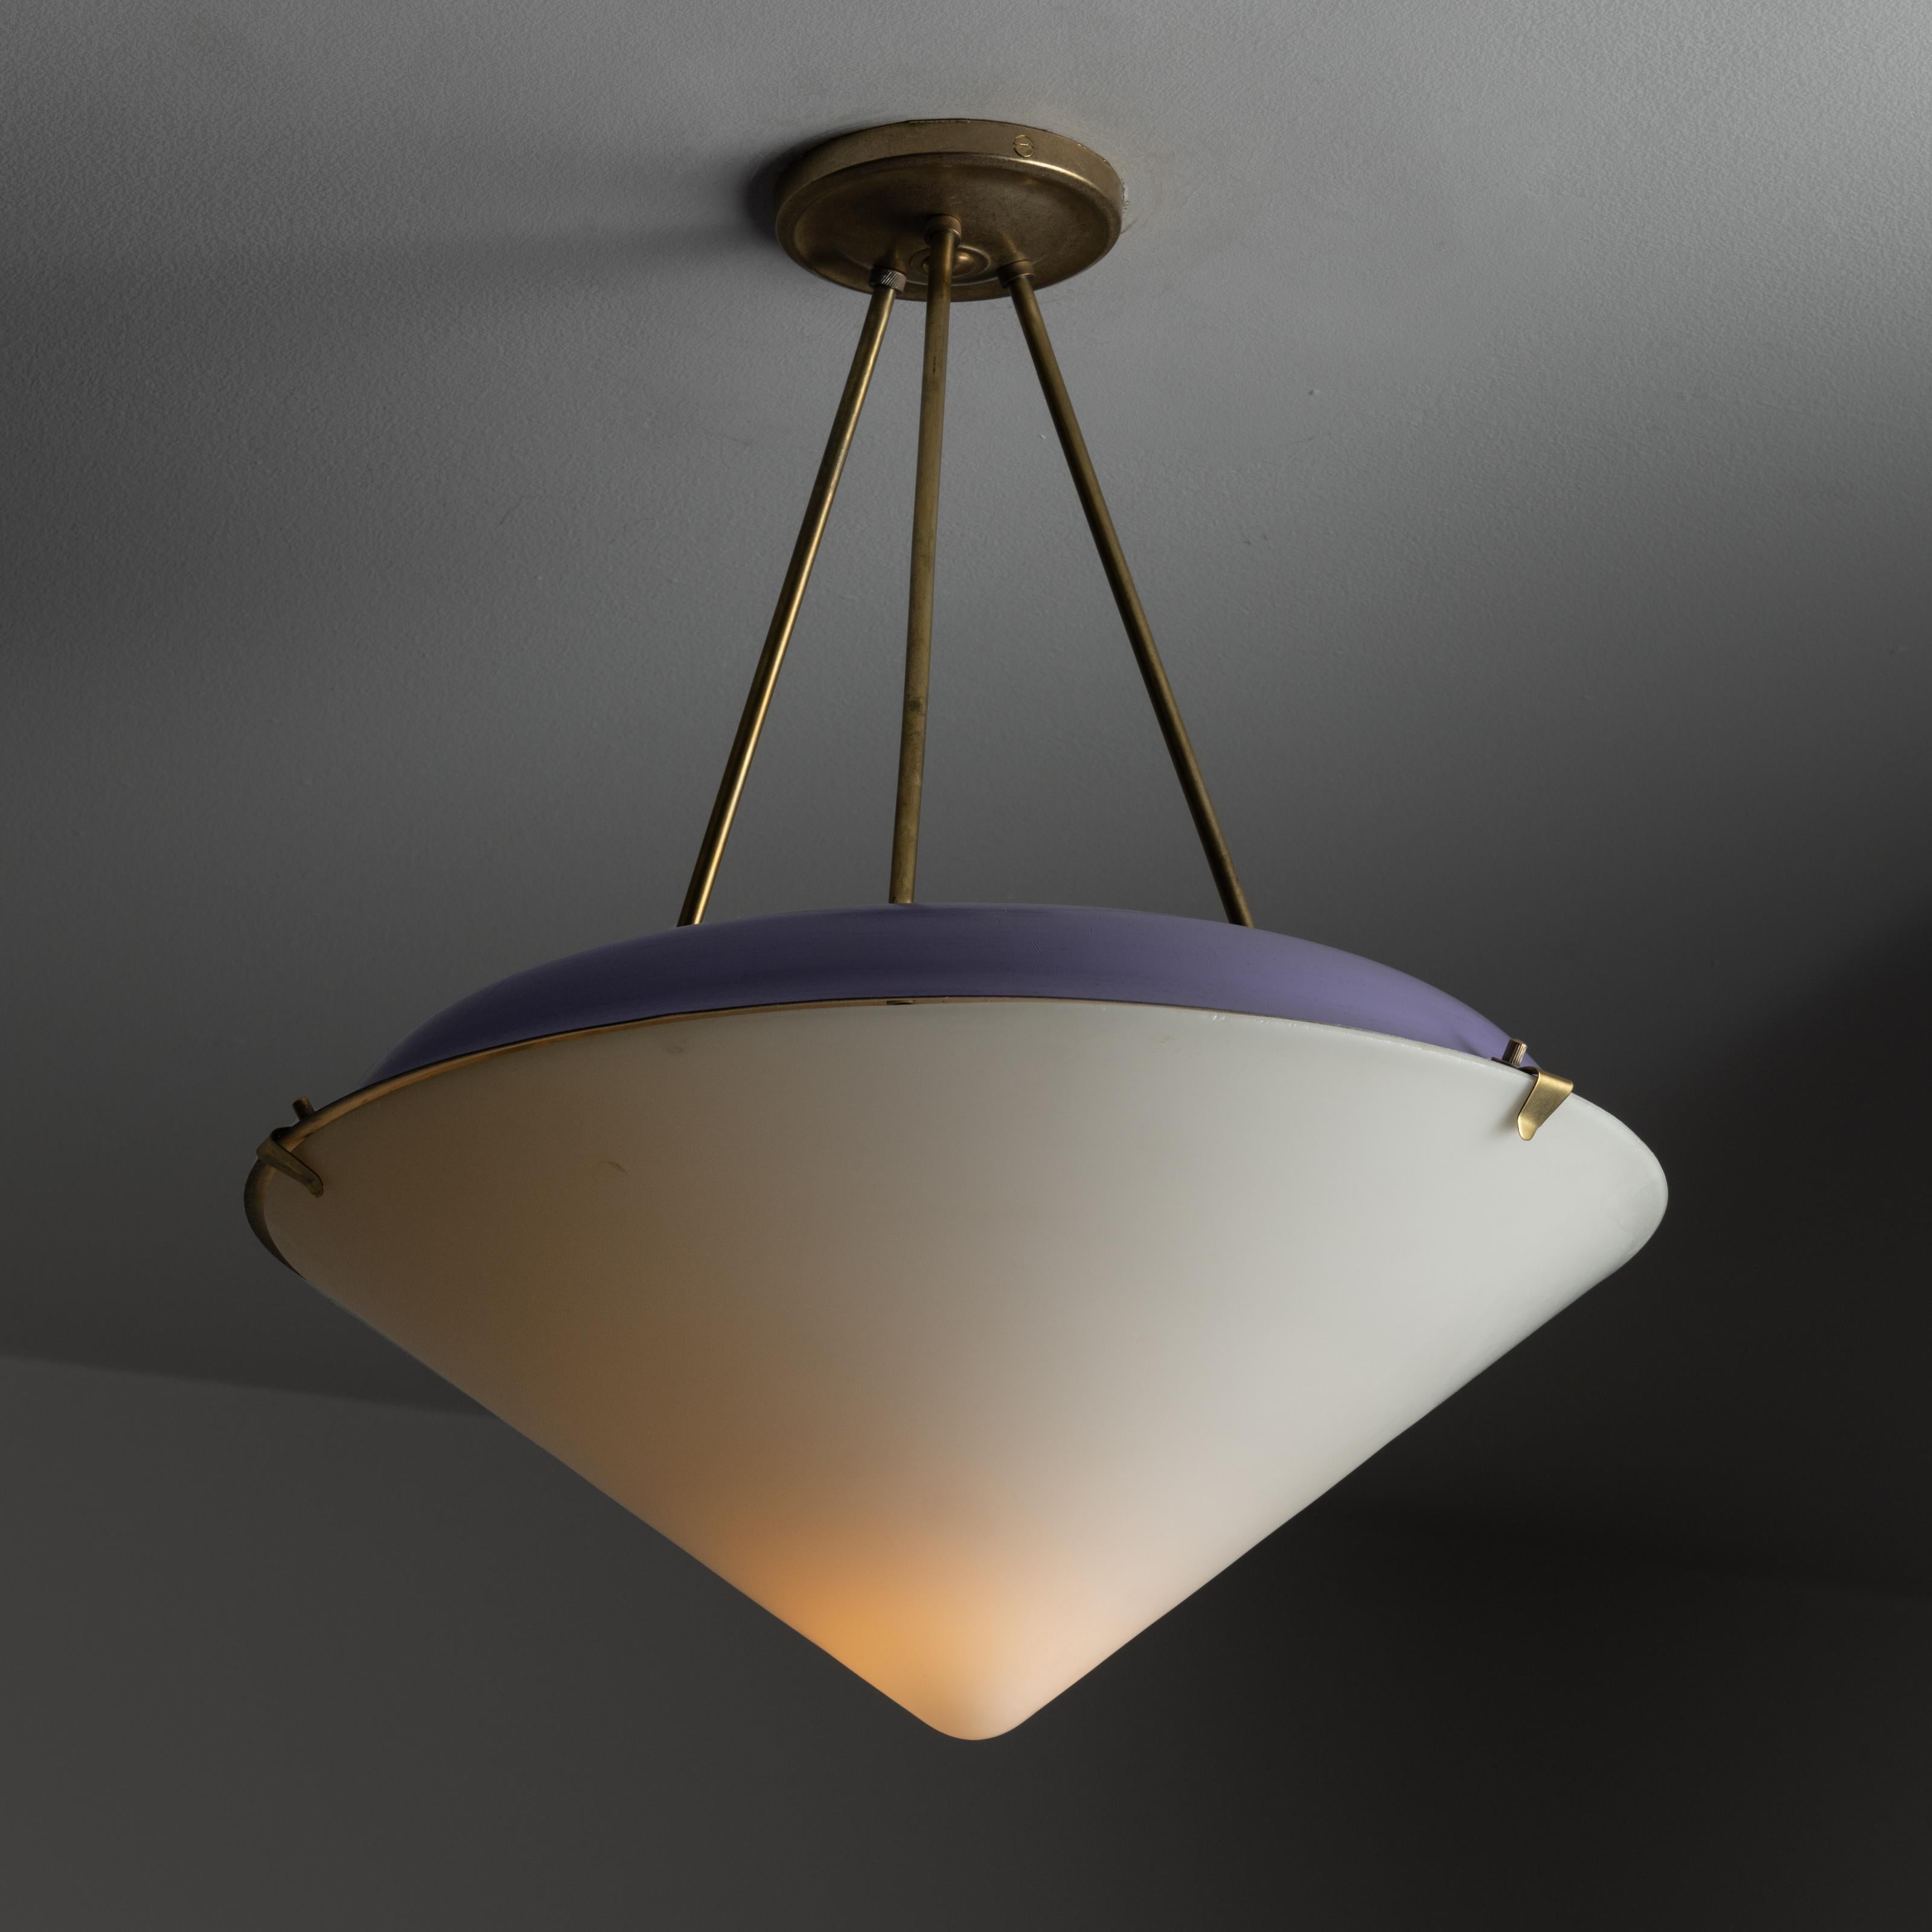 Italian ceiling lights by Stilux. Designed and manufactured in Italy, circa the 1960s. Colorful conical pendants with brass tripod canopy and opaline glass shade. Shade colors are in purple and pink. **GREY IS NOT AVAILABLE, ALREADY SOLD**  We